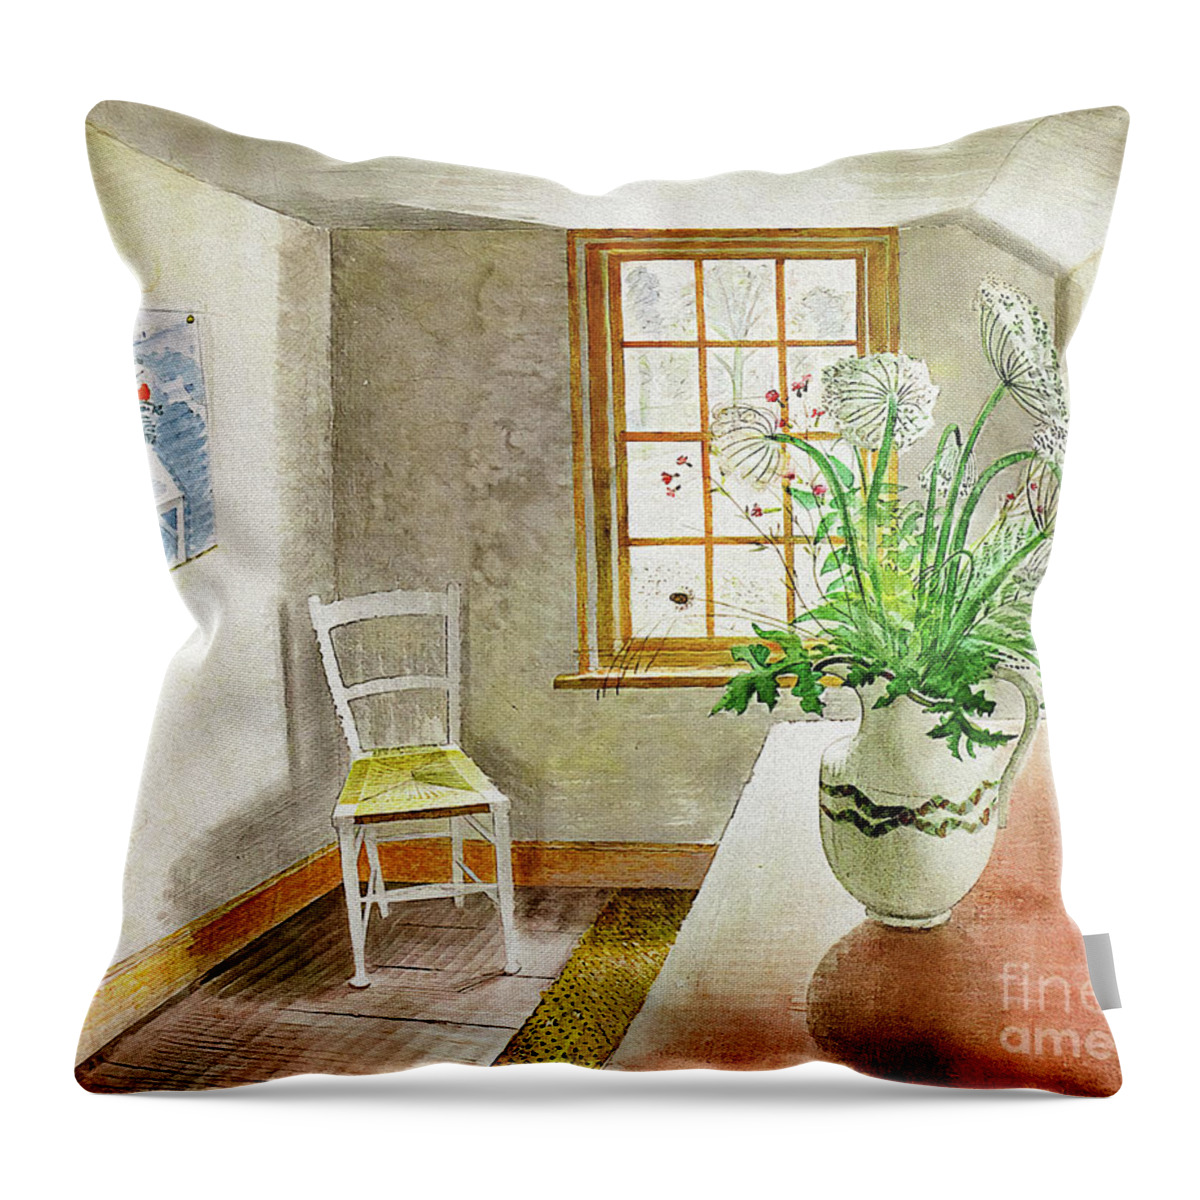 Cc0 Throw Pillow featuring the photograph An Ironbridge Interior by ERIC RAVILIOUS by Jack Torcello